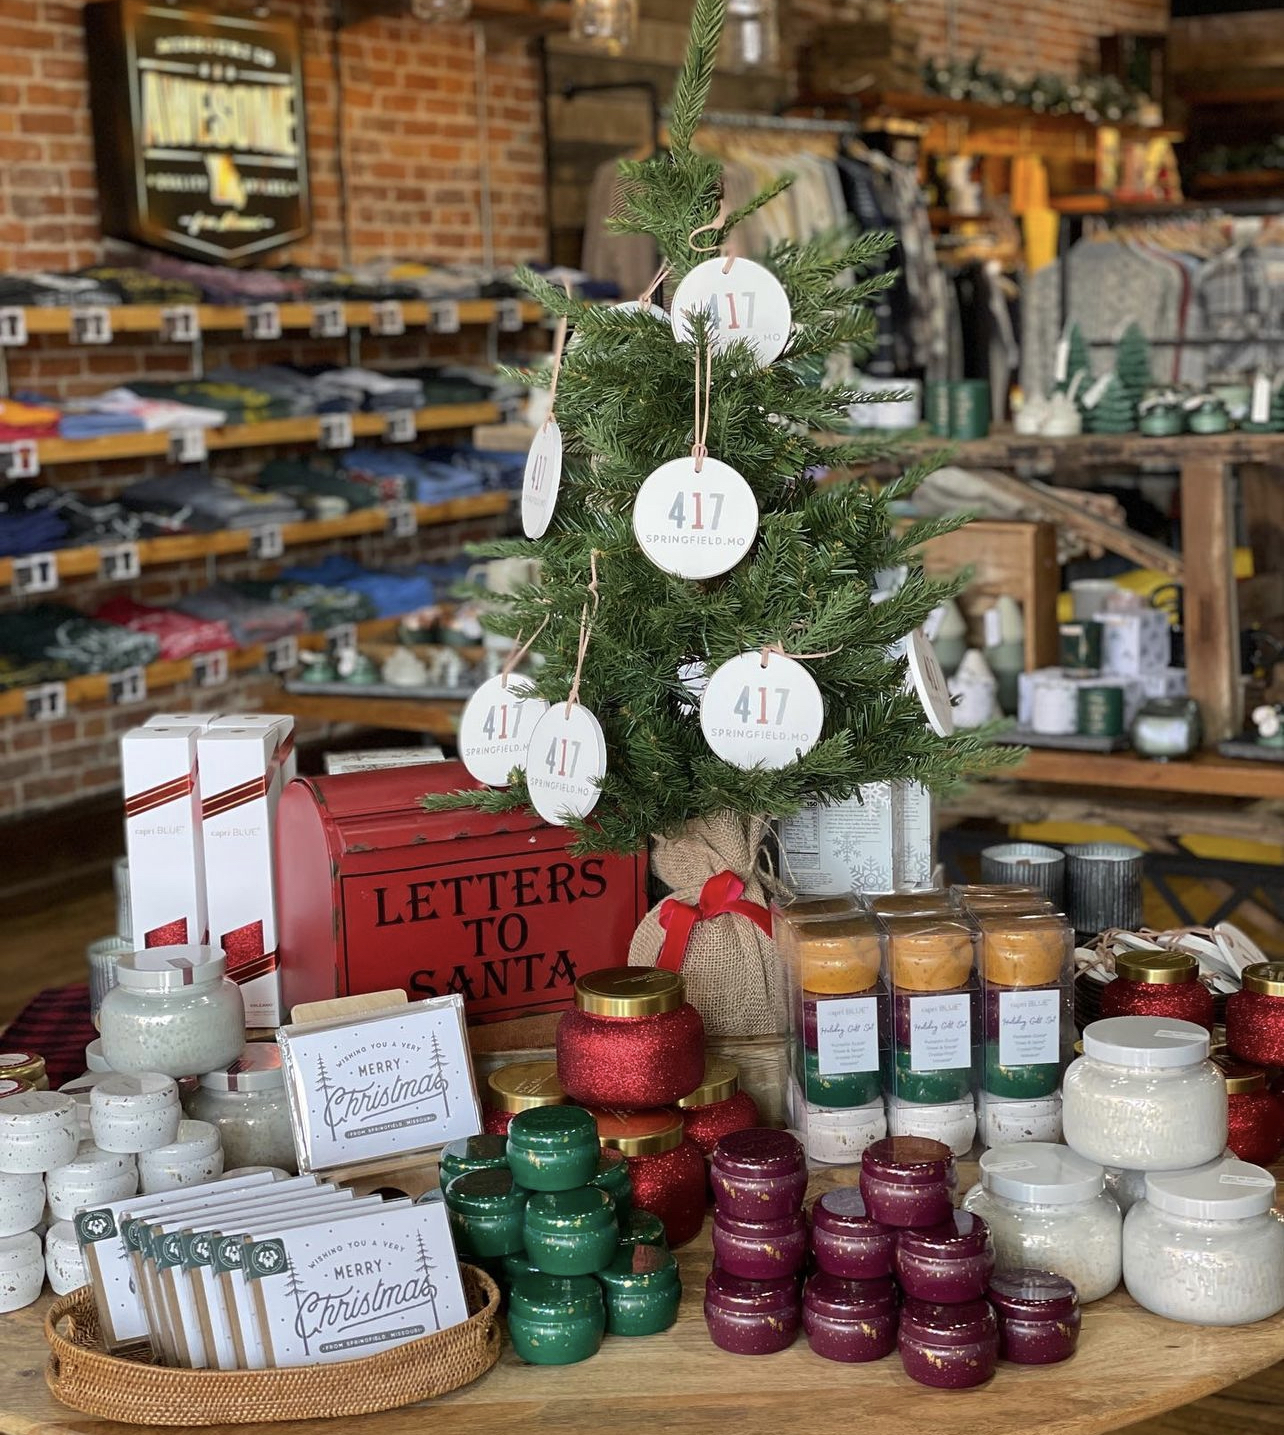 A display of Christmas ornaments and gifts inside 5 Pound Apparel in Springfield, Missouri